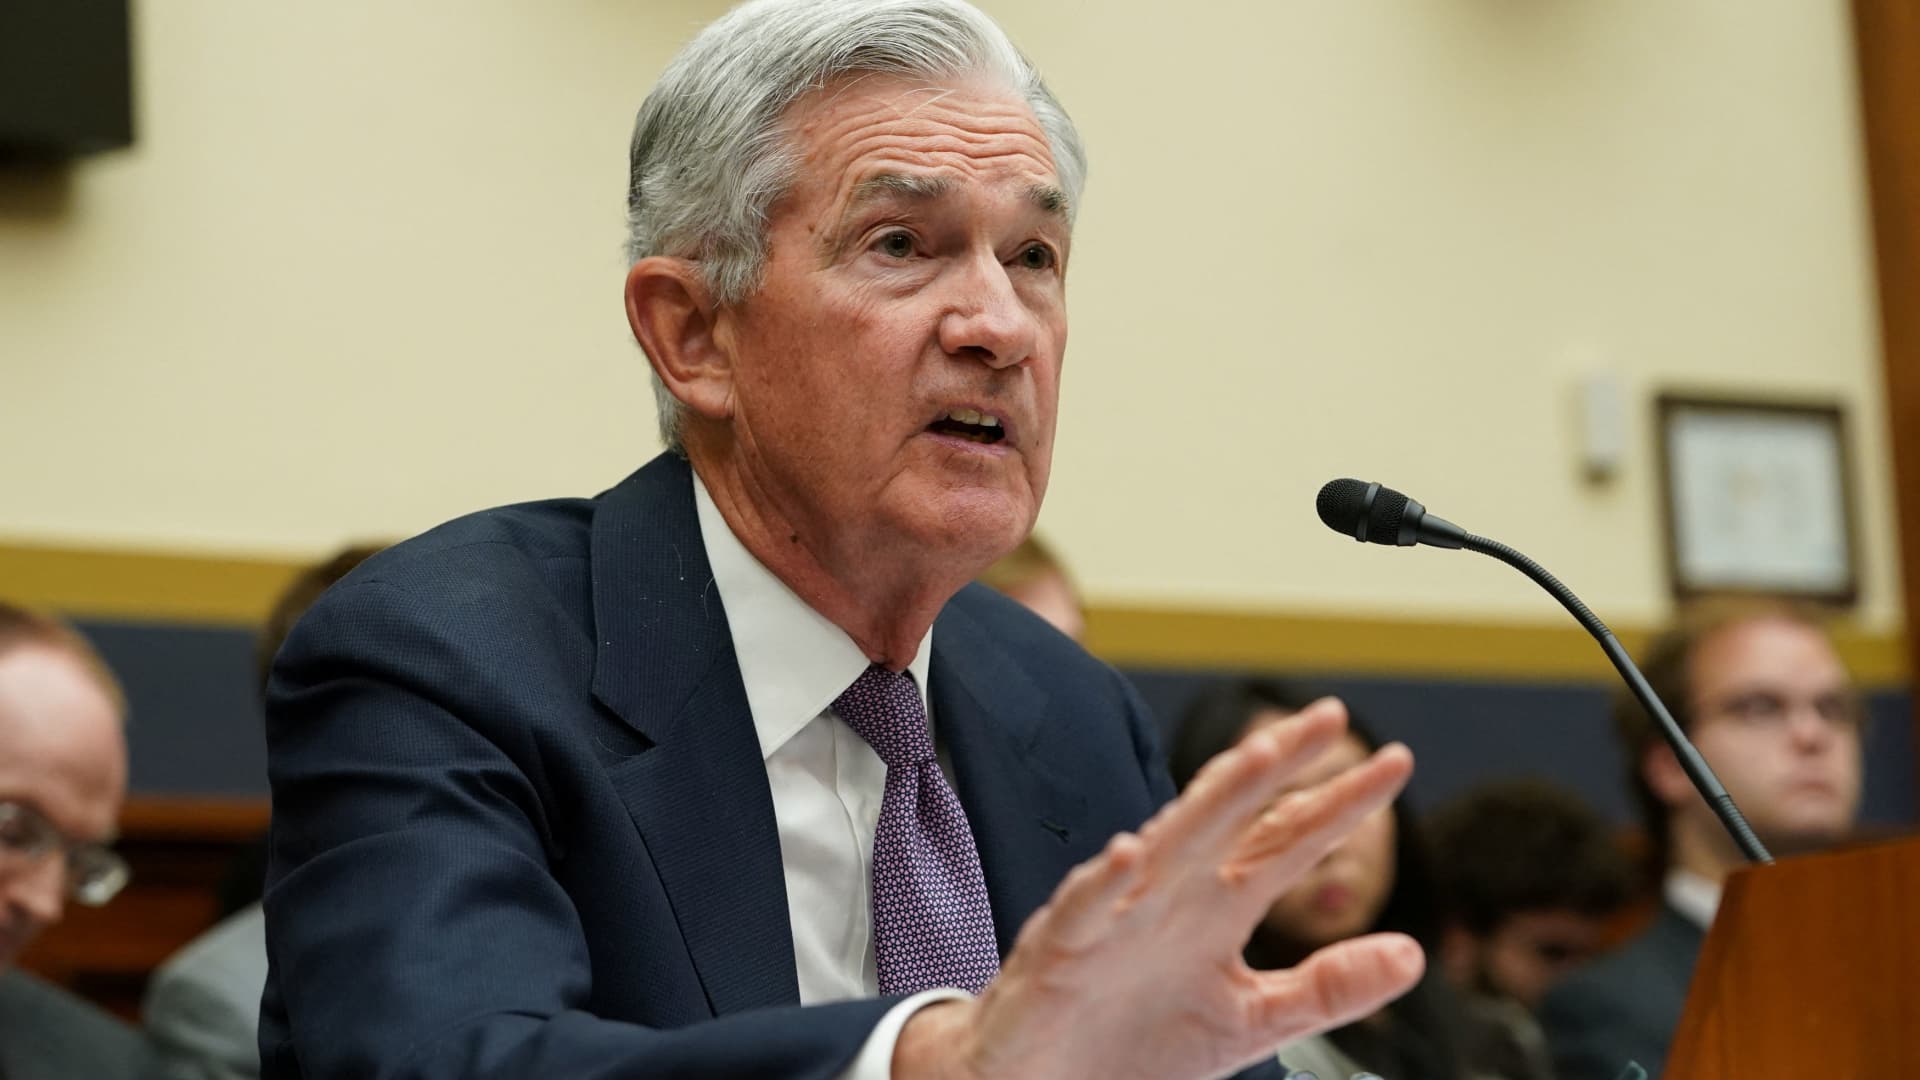 Powell’s Quick Actions Alter Entire Market Perception on Interest Rates in Record Time